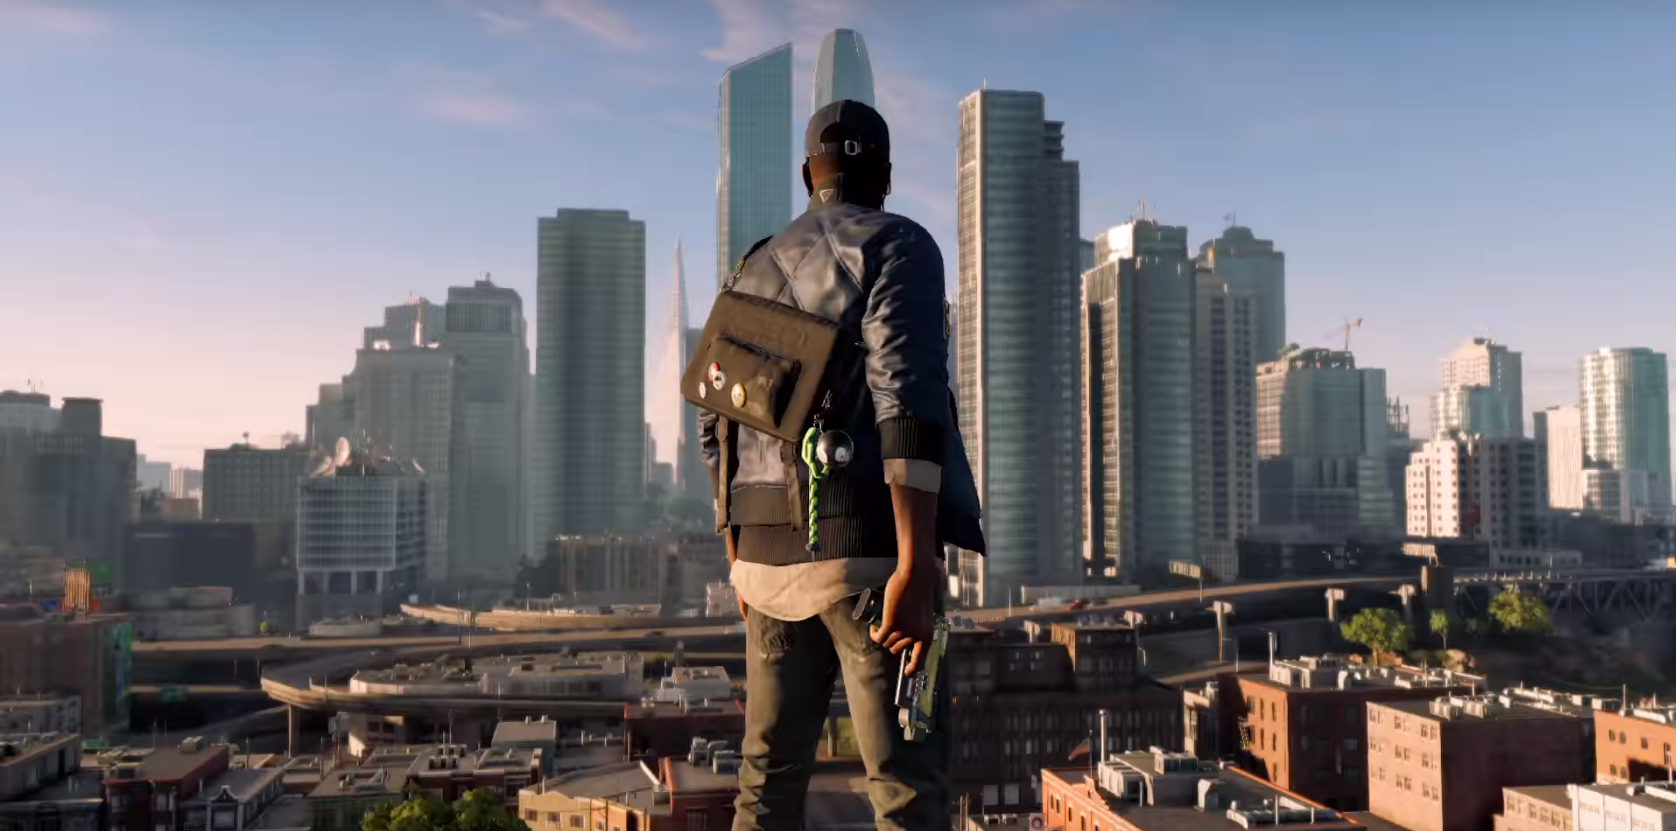 “Watch Dogs 2” Story Trailer Revealed